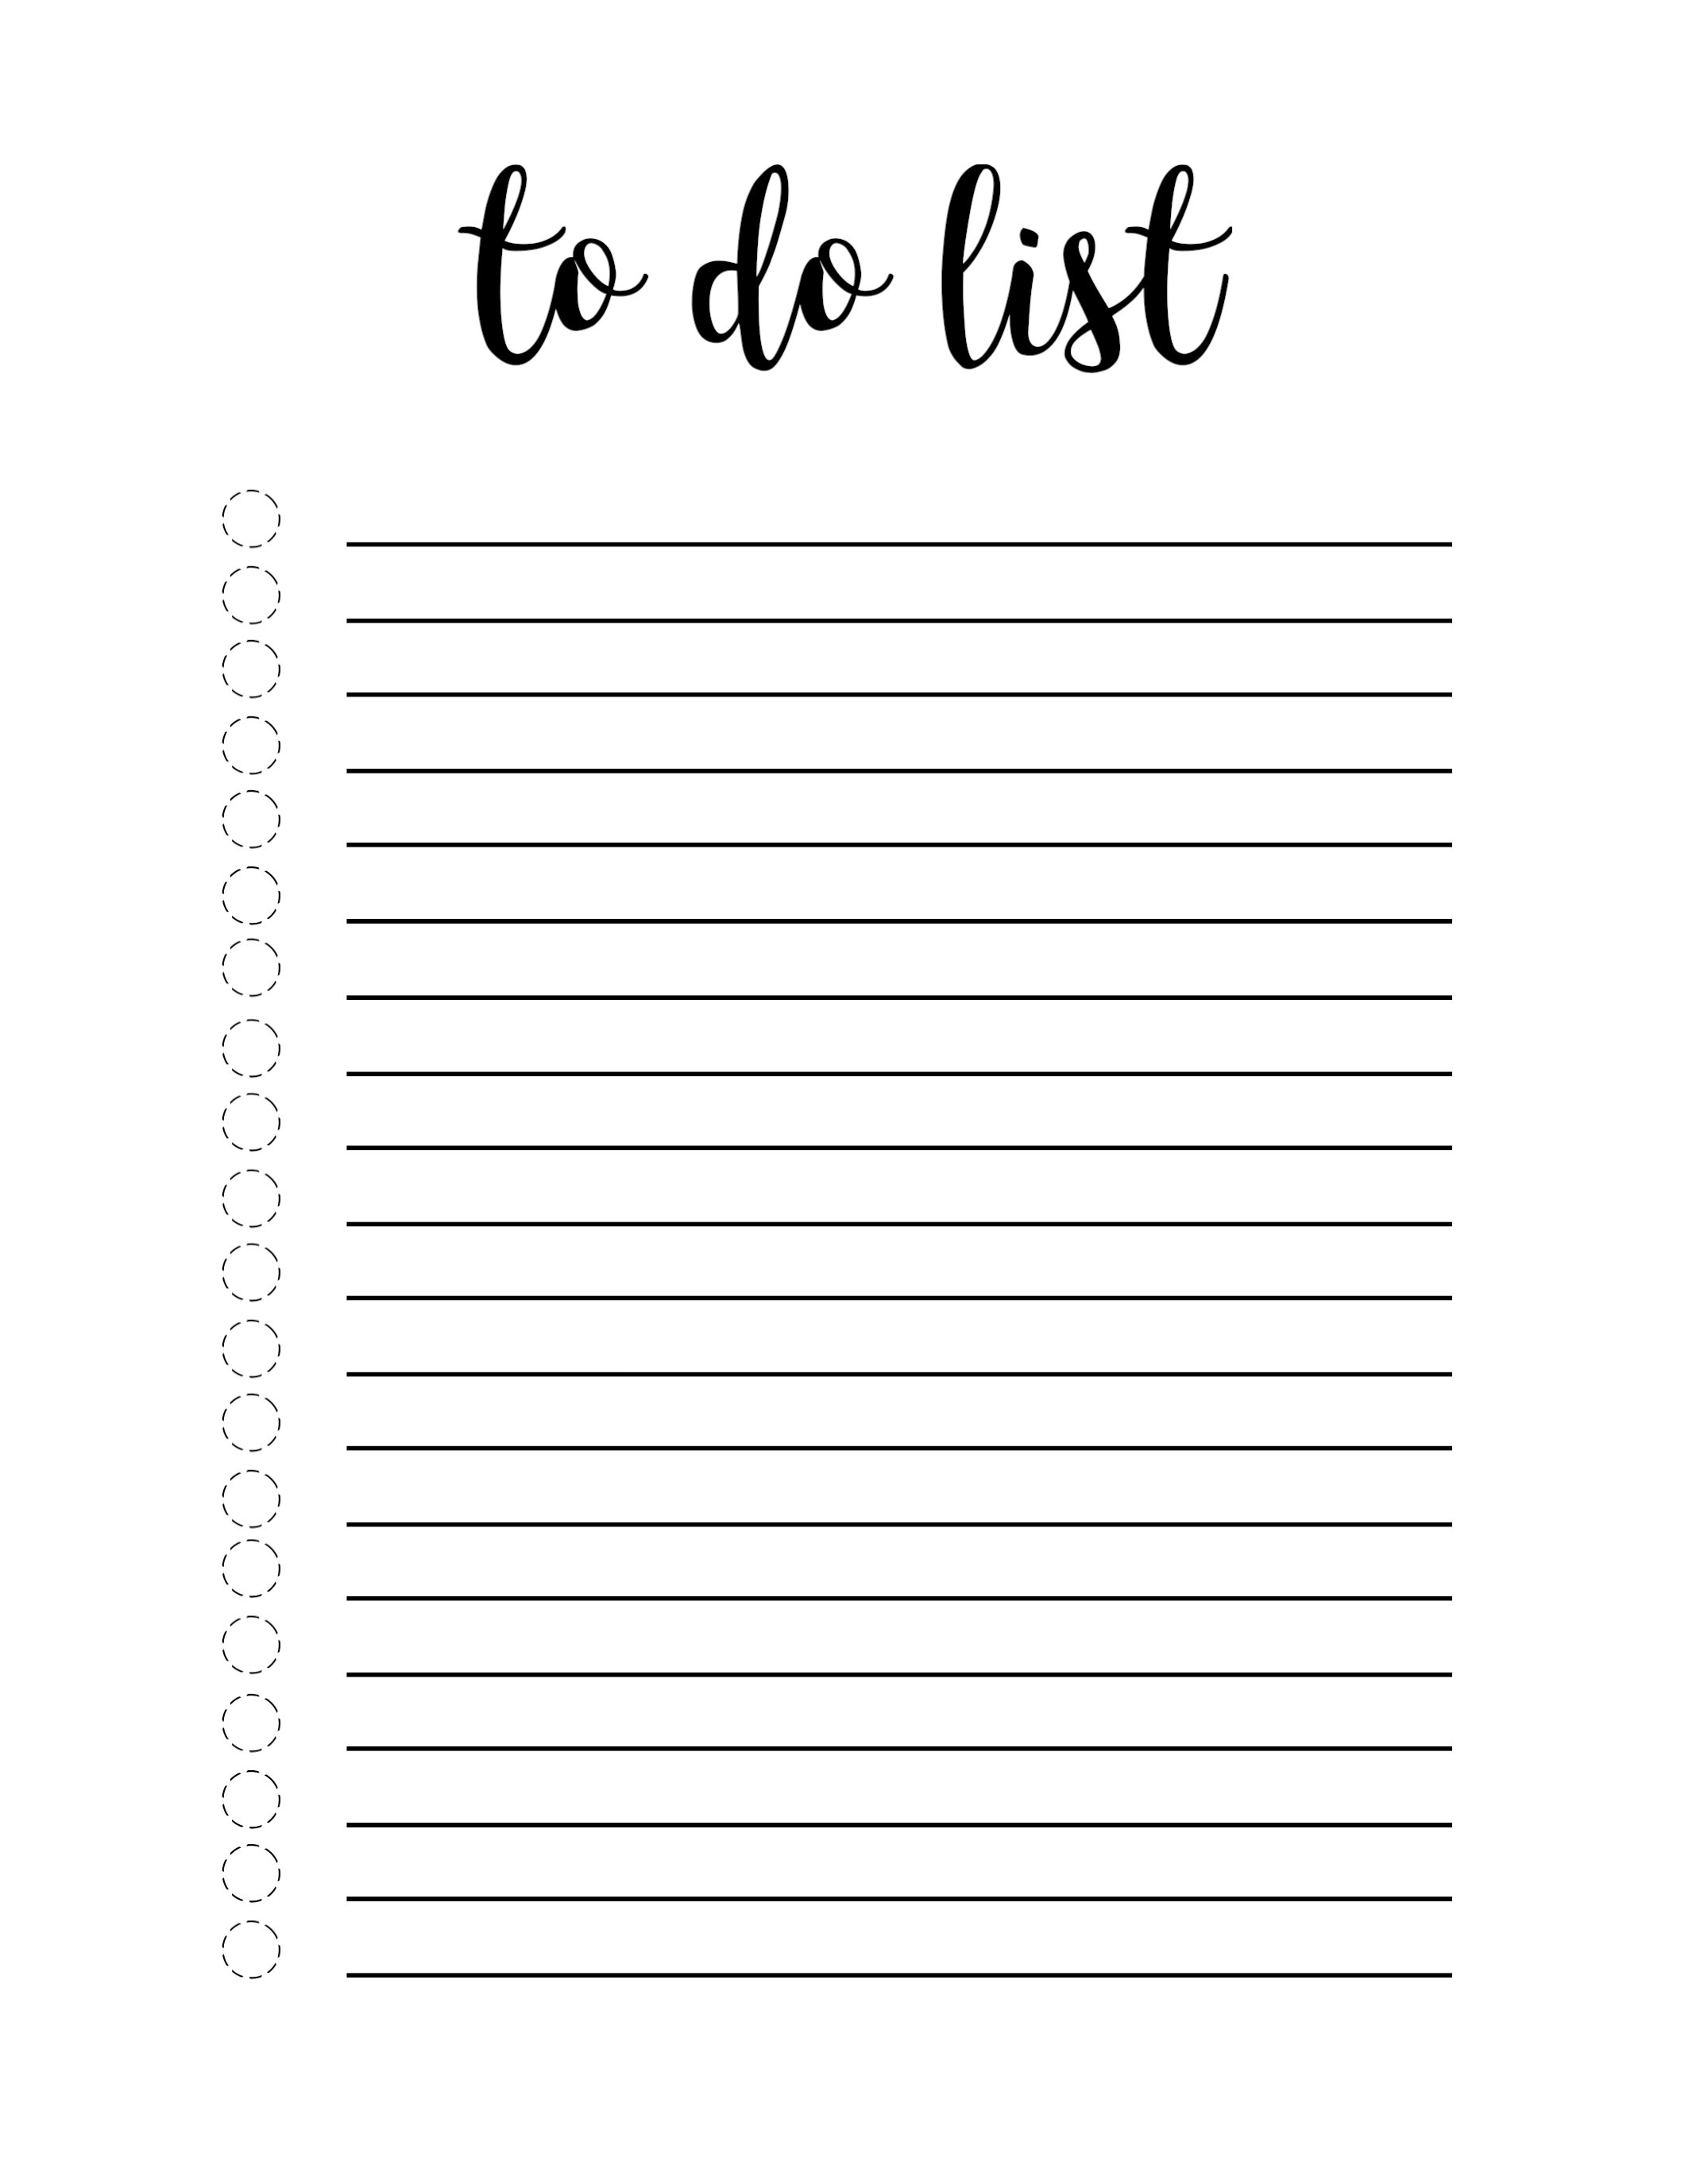 Free Printable To Do List Template - Paper Trail Design - To Do Template Free Printable